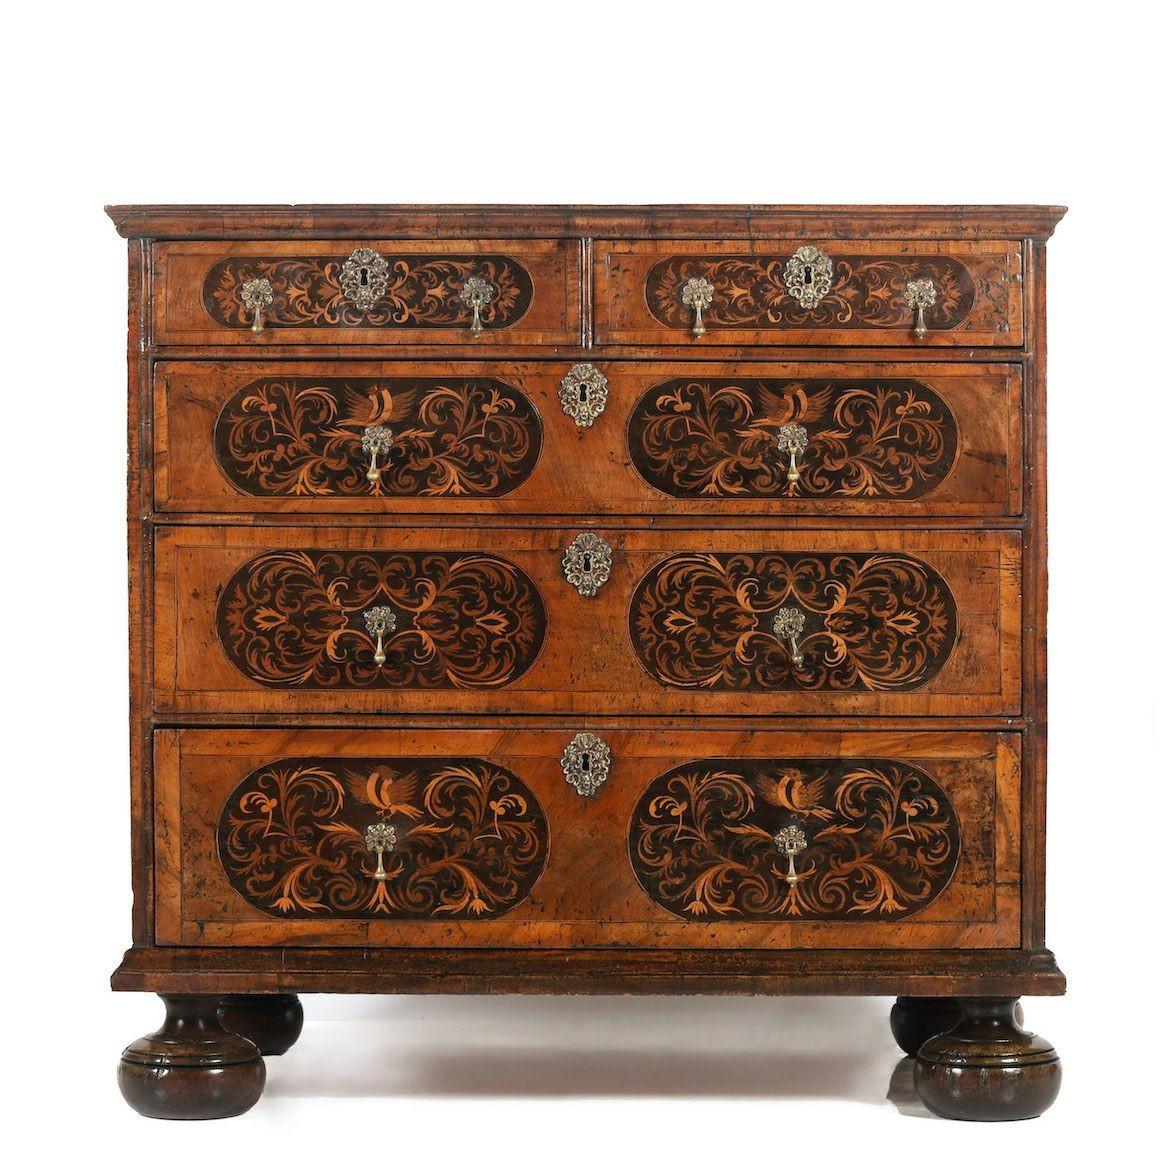 A fine English walnut and ebony seaweed marquetry chest of drawers from the William & Mary period, circa 1690. Ogee molded top with a central banded oval inlaid with exquisite hand-cut marquetry of birds, flowers, and foliated scrolls that resemble